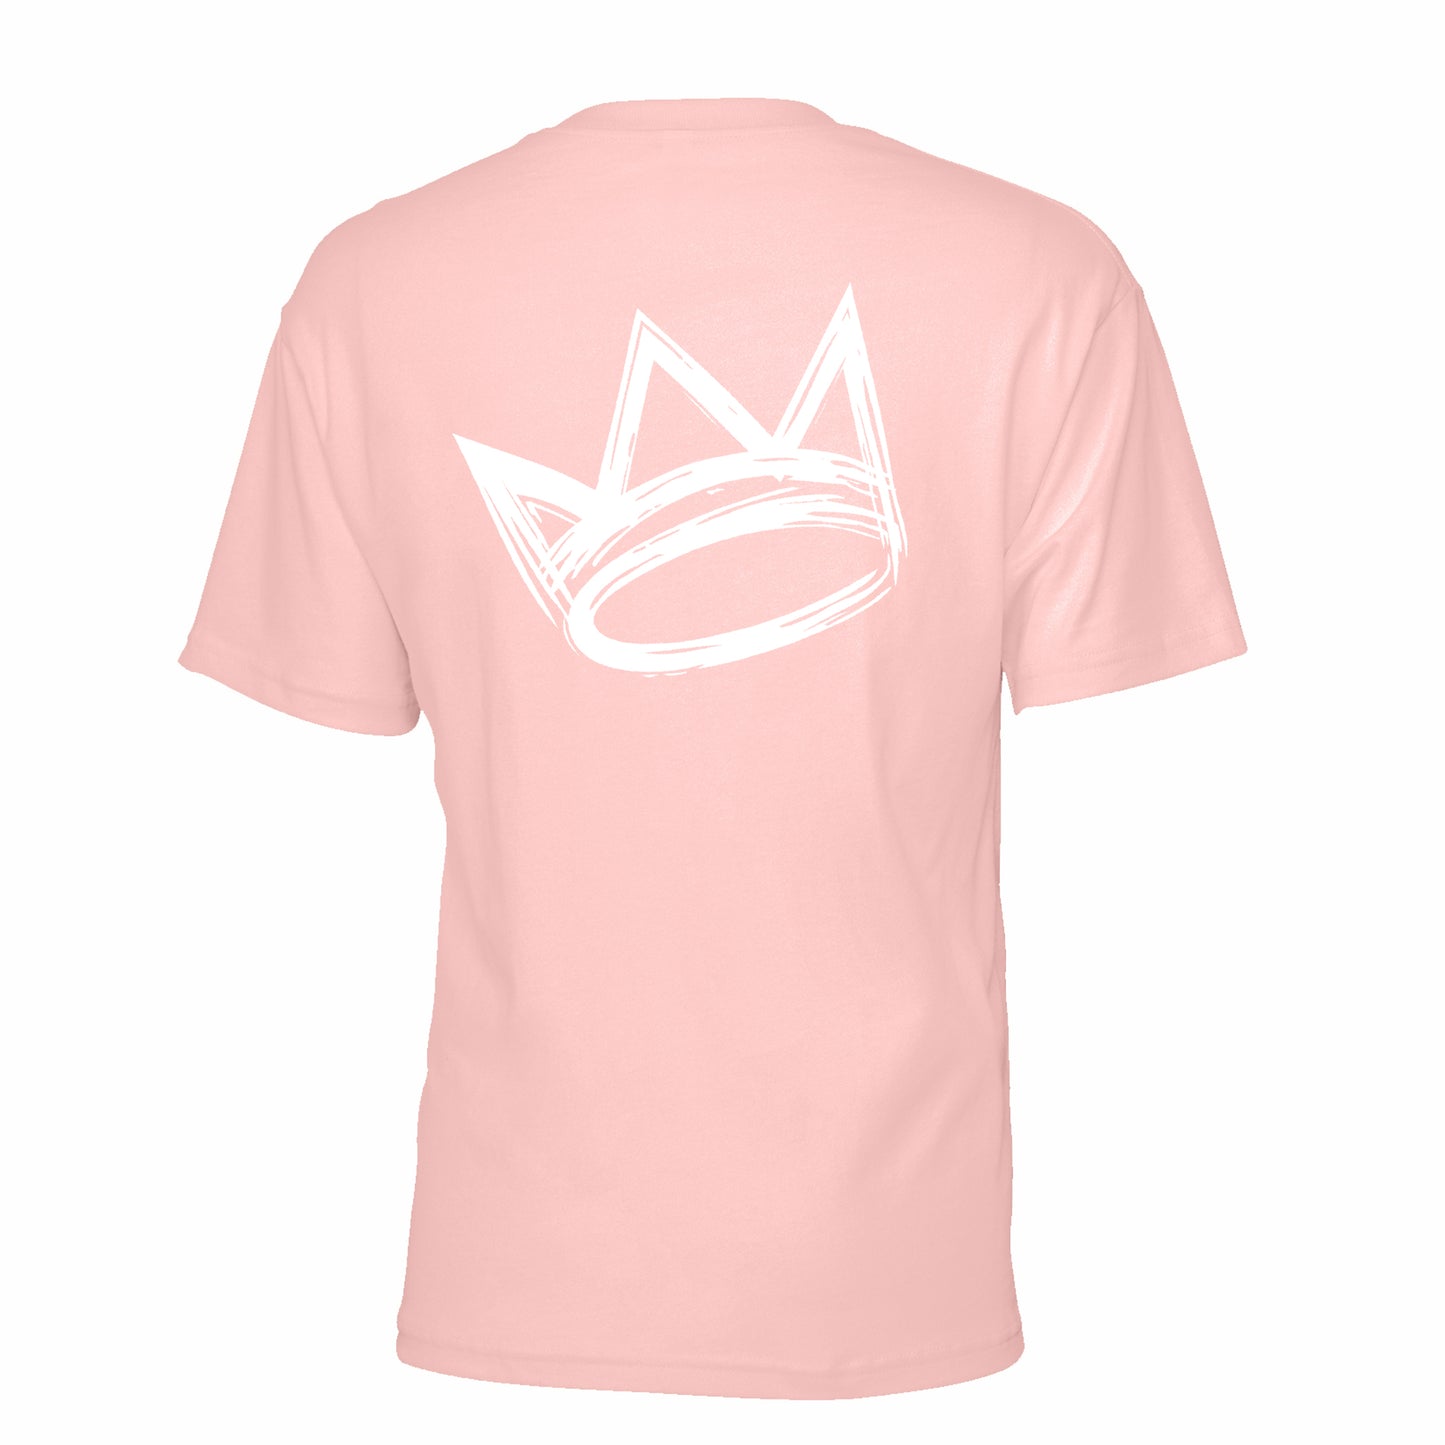 King Crown Collection (Pink Short Sleeve T-Shirt White Crown)